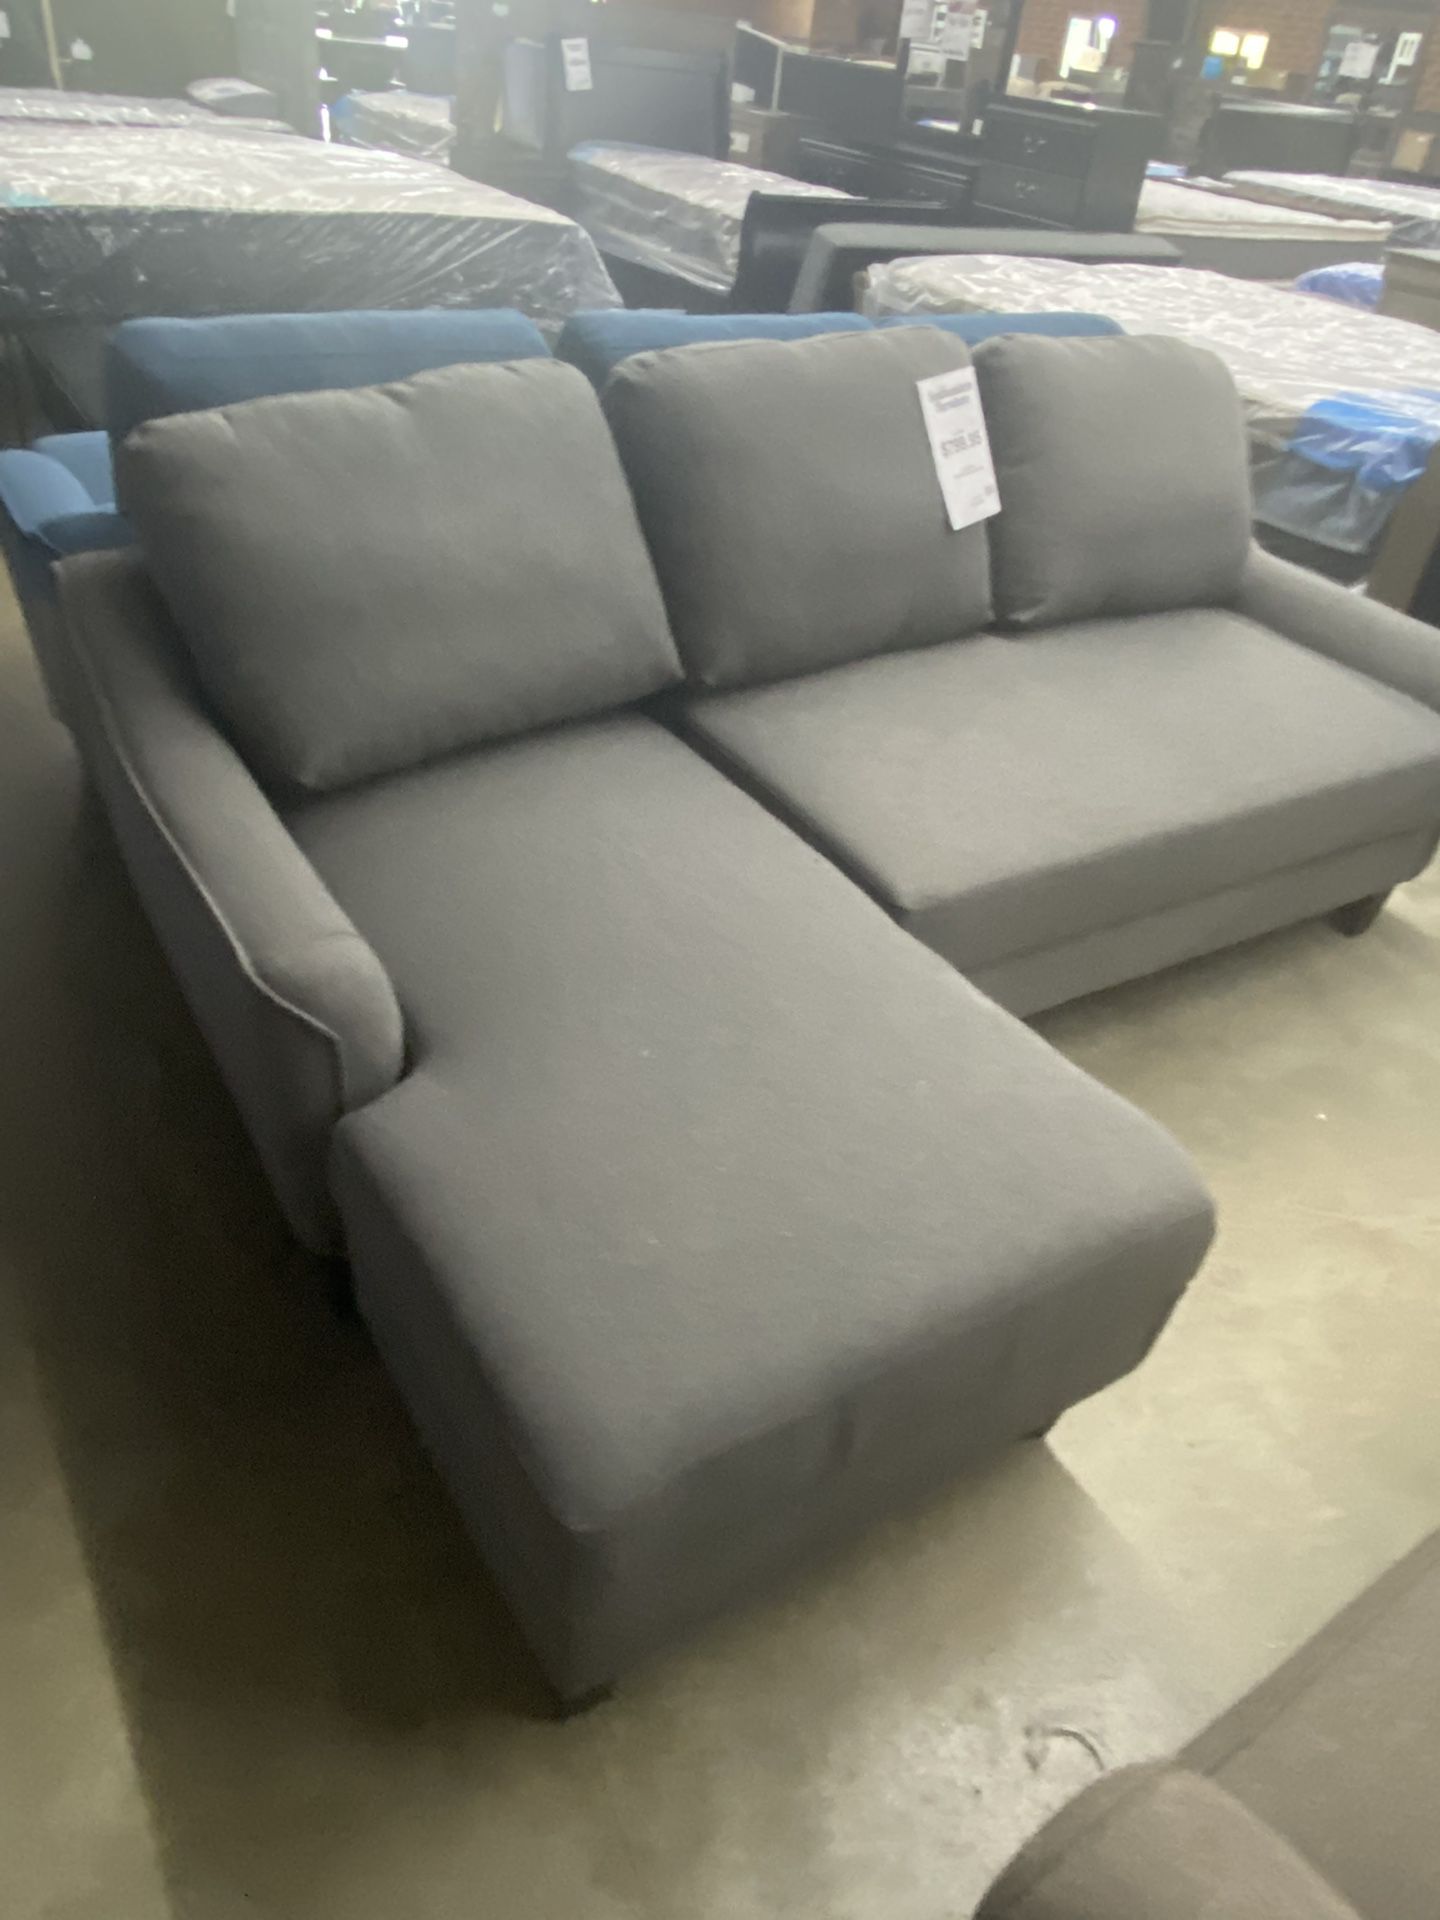 $10.00 Down No Credit Needed Financing! New Sofa Chaise Sleeper, Only $799.95!